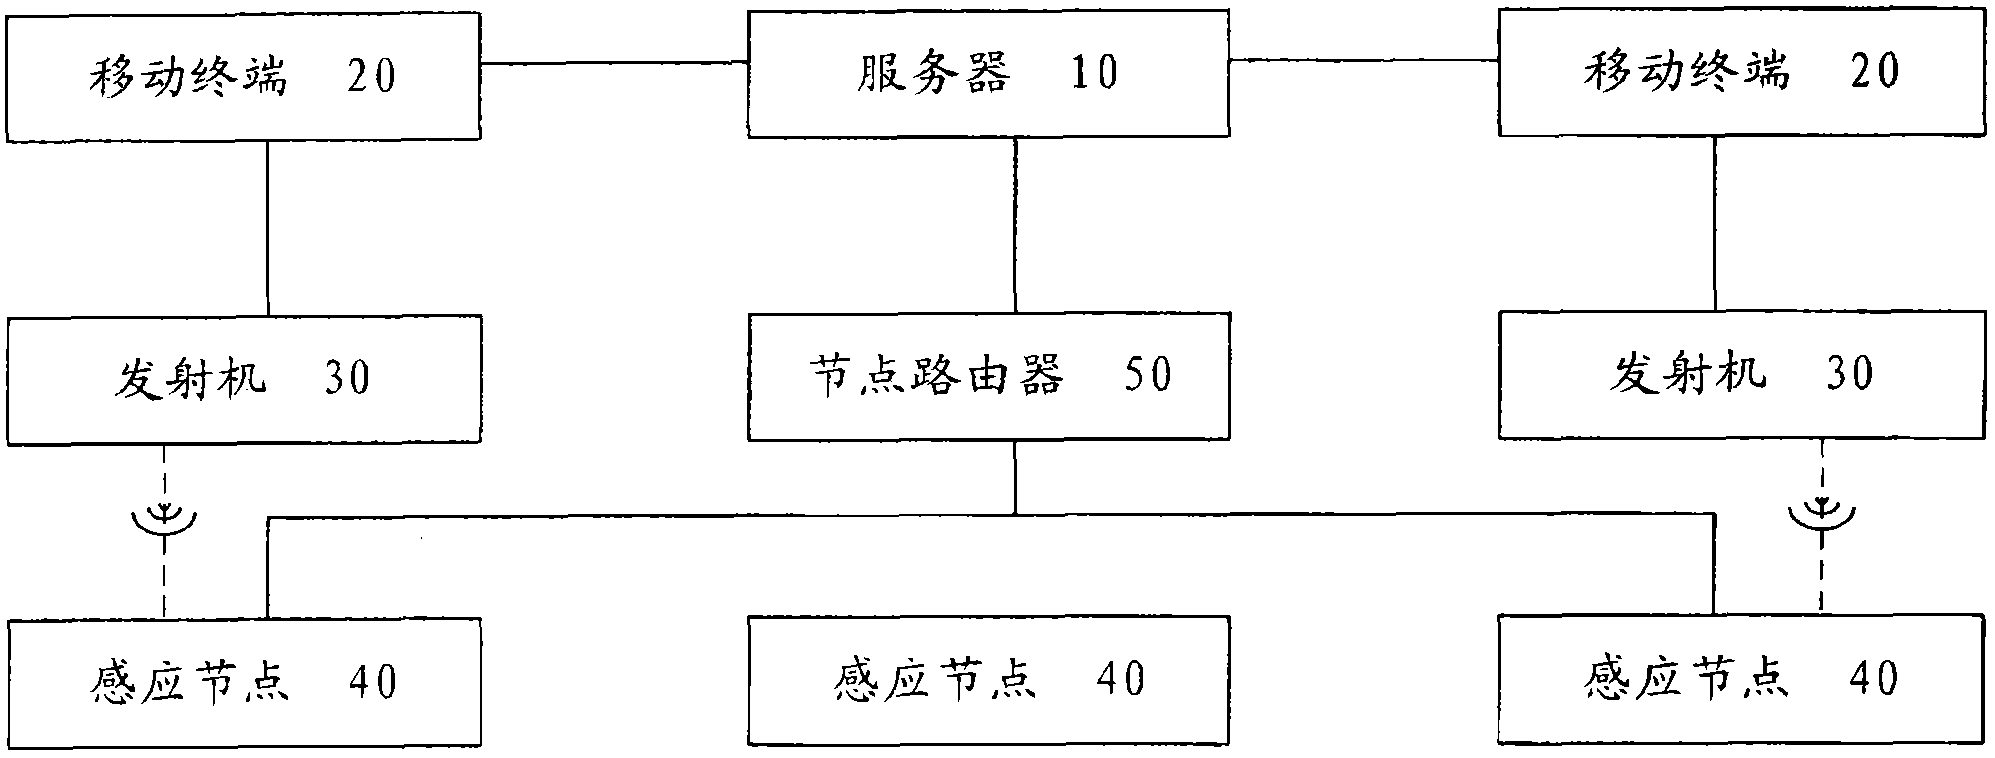 Wireless communication switching system and method based on MiWi or ANT+ interoperation technology